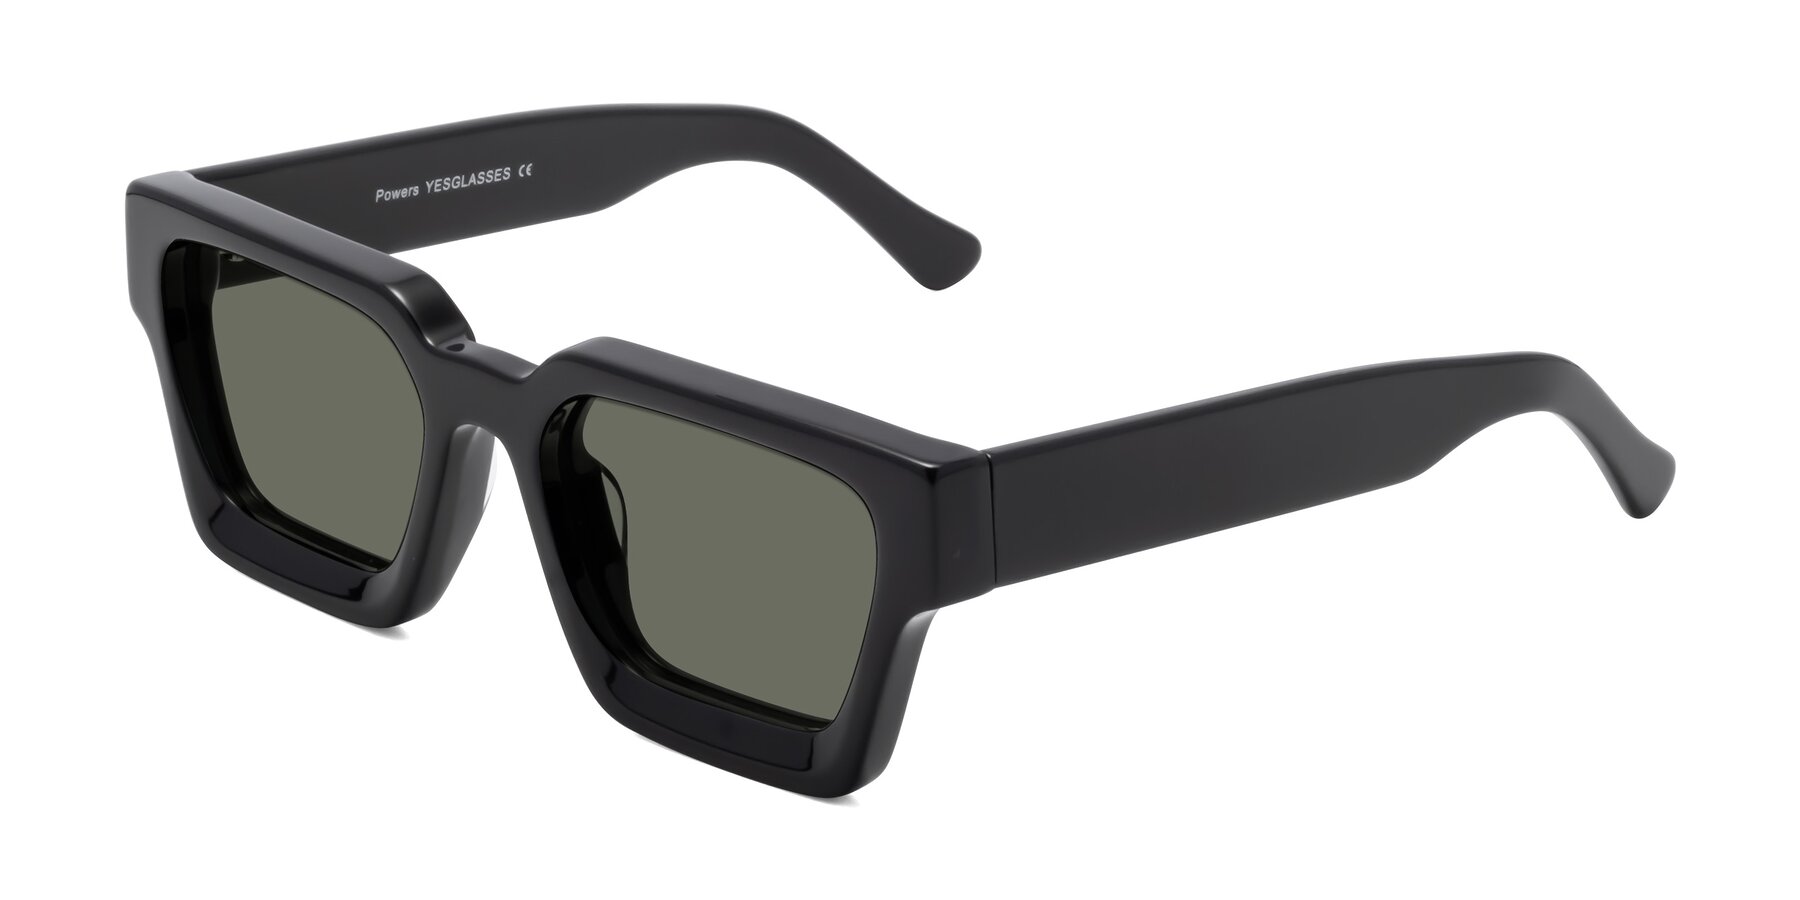 Angle of Powers in Black with Gray Polarized Lenses